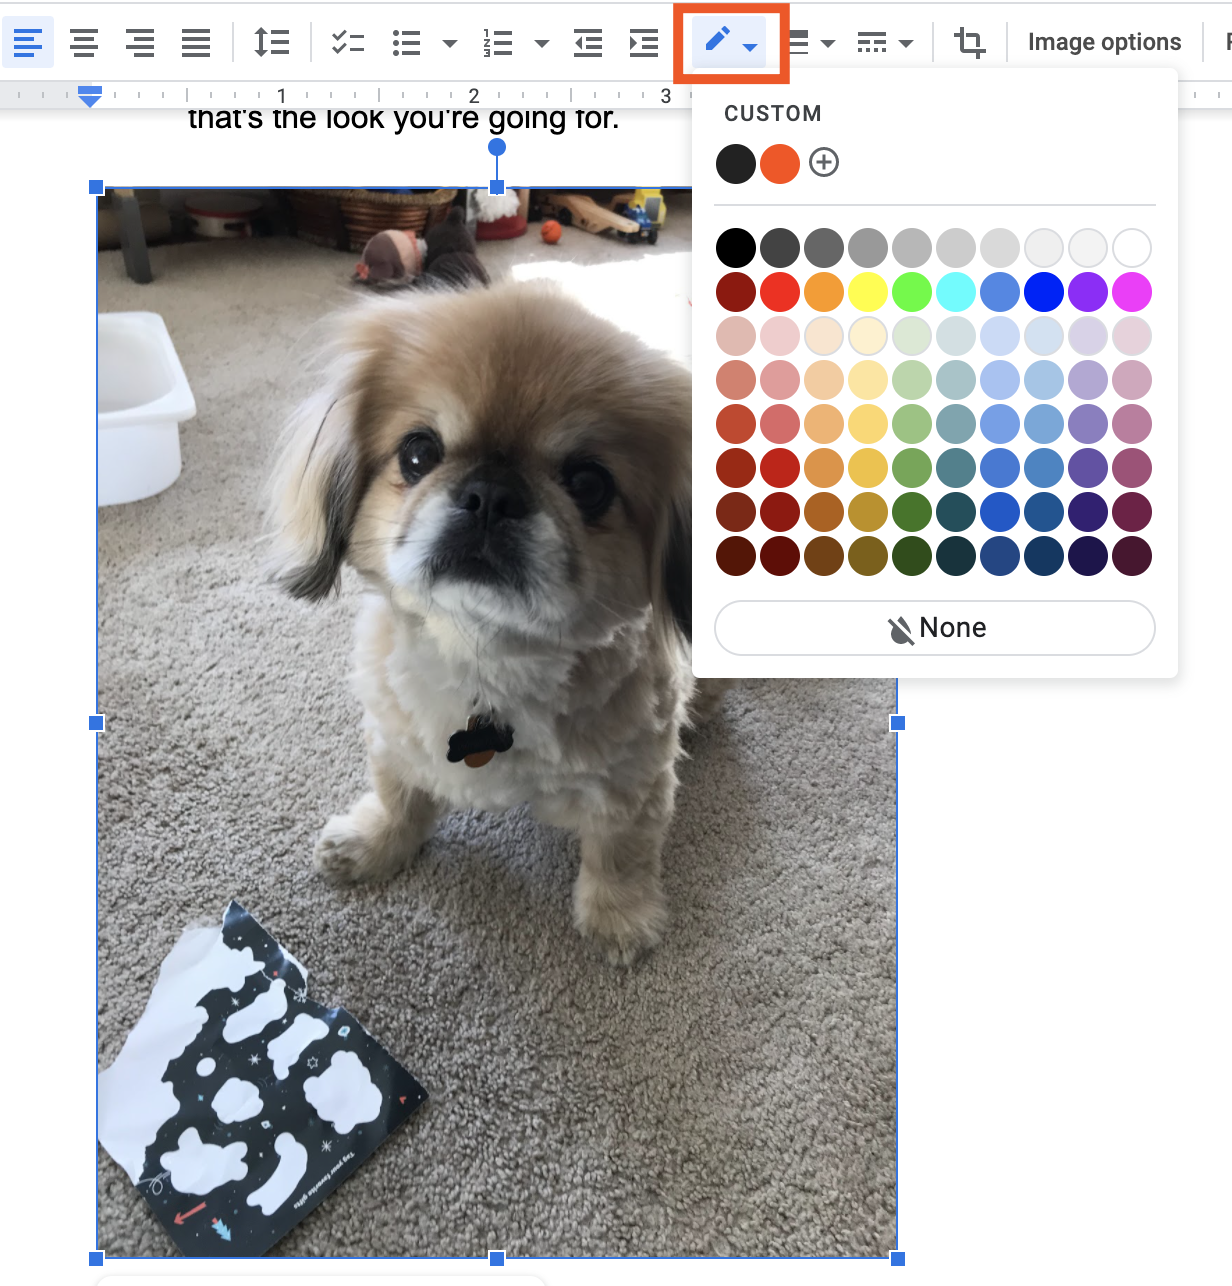 How to add an image border in Google Docs. 